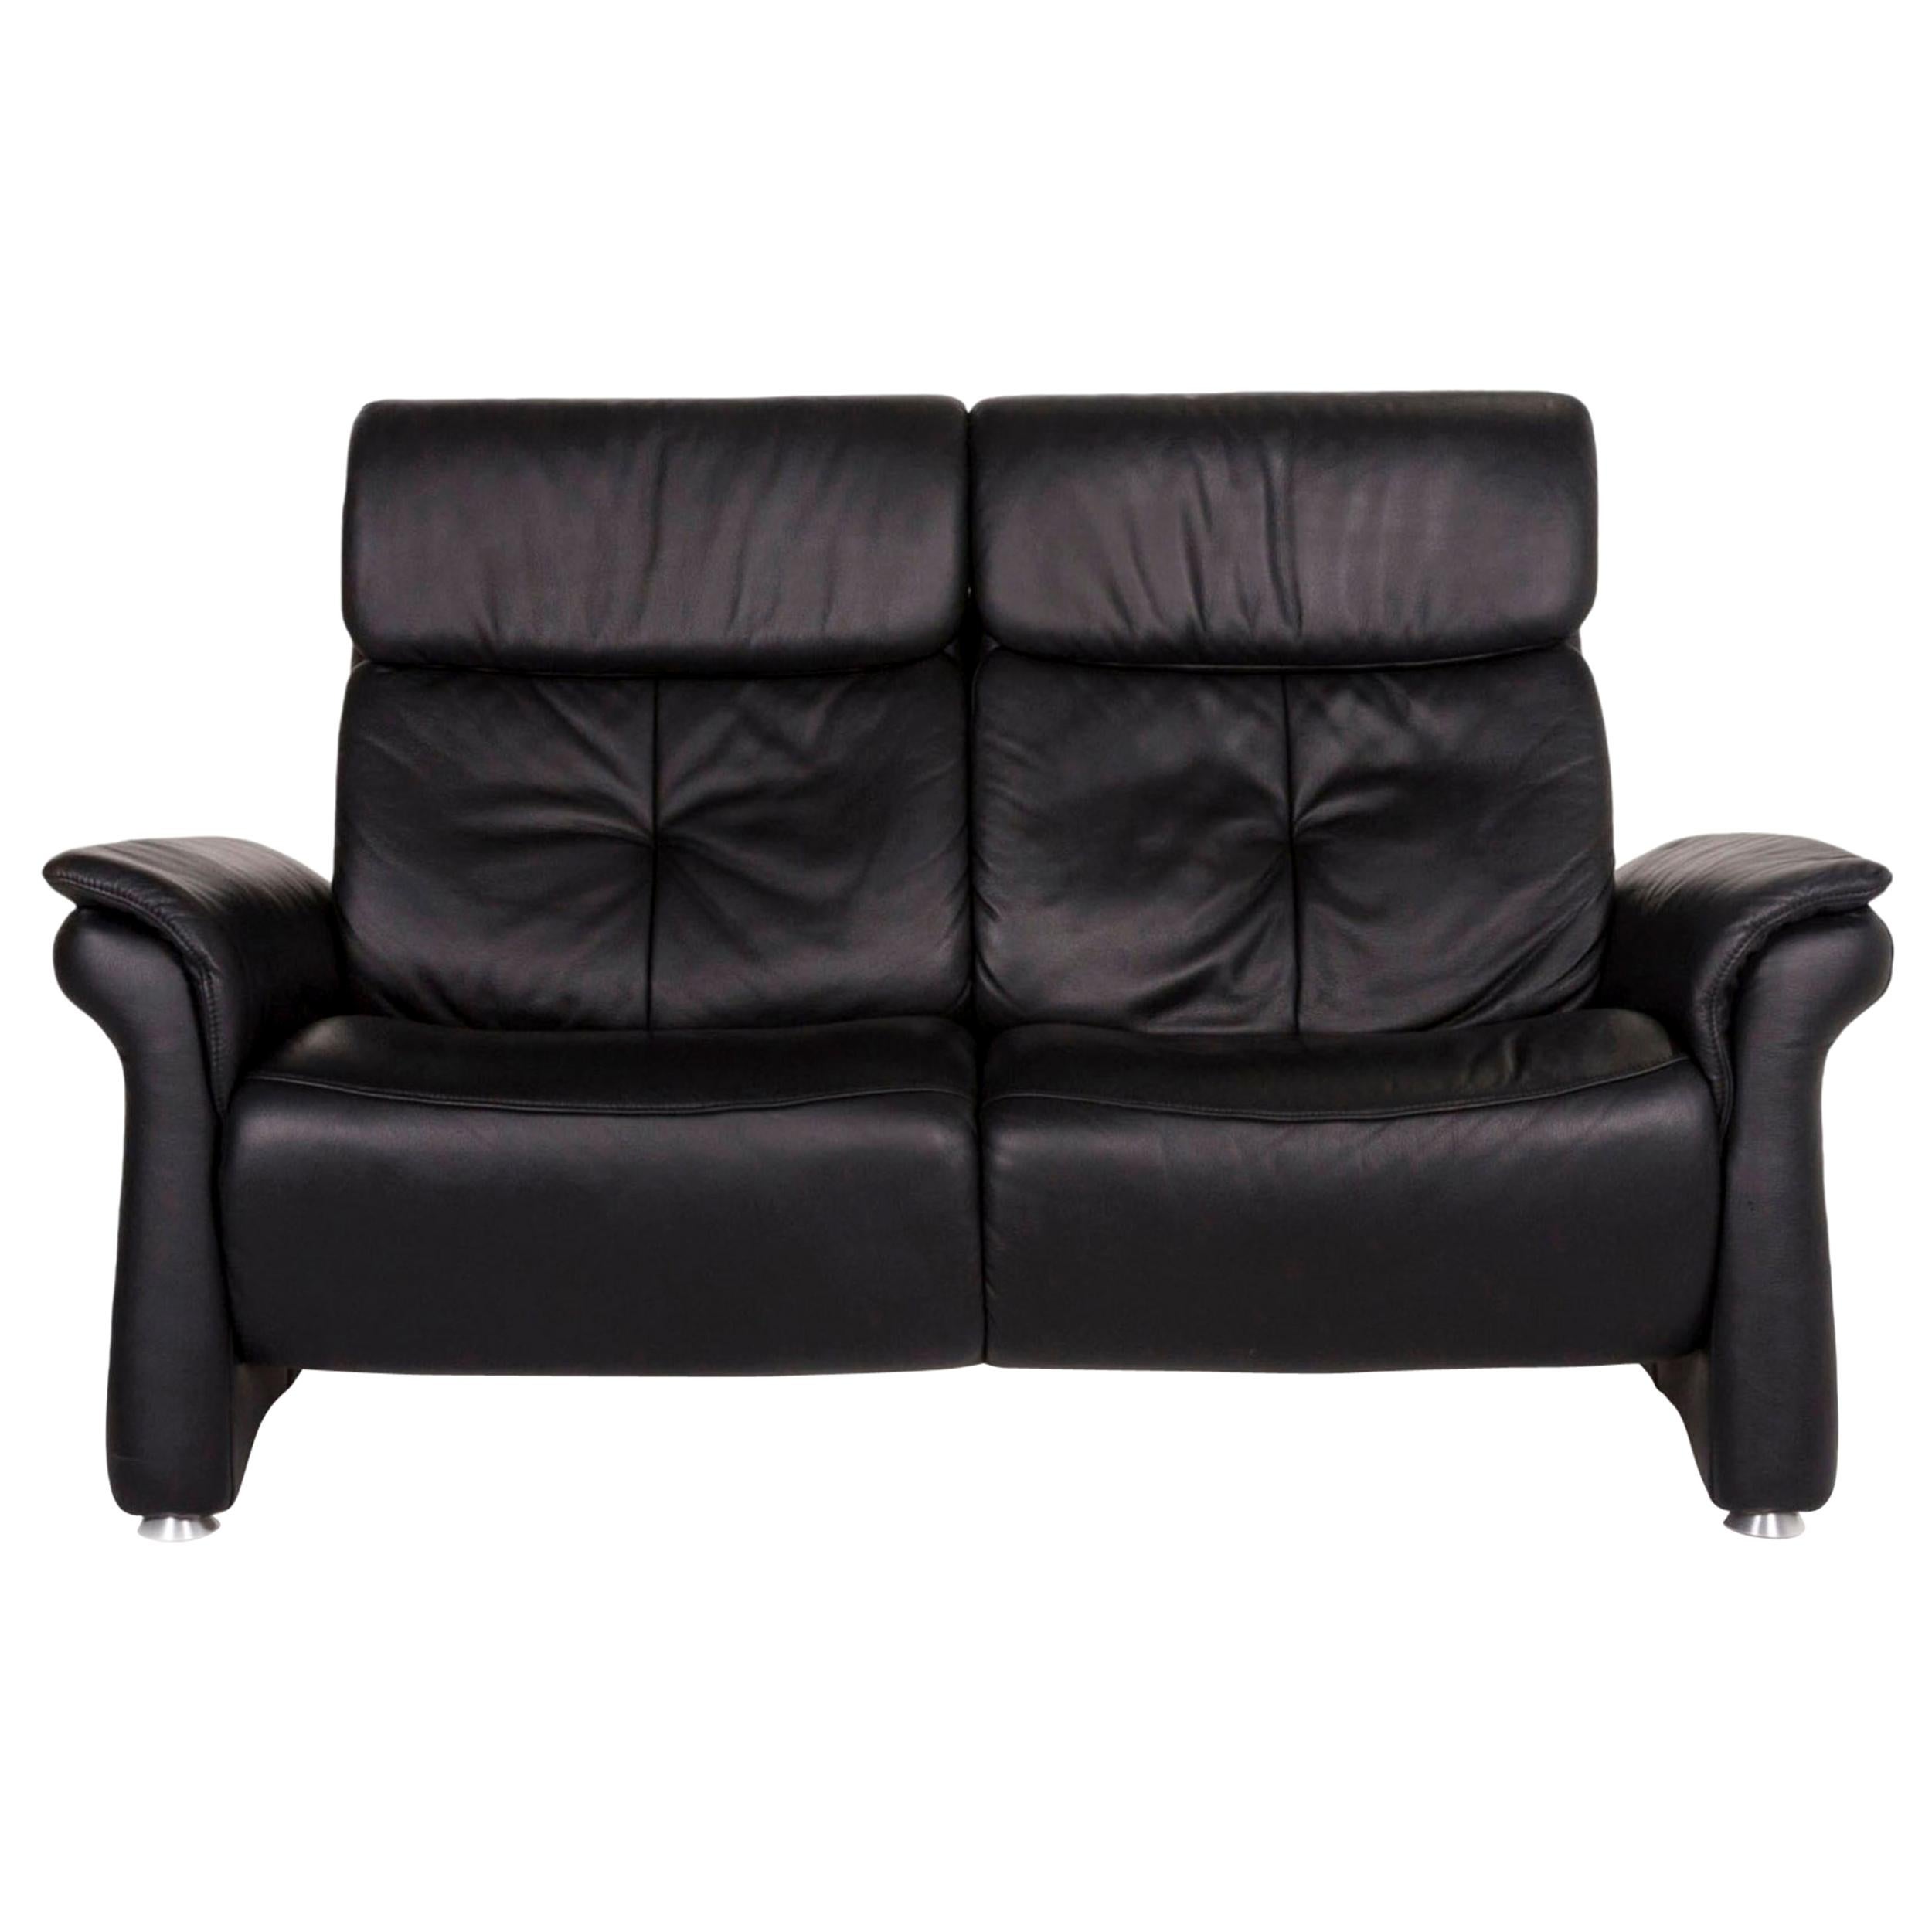 Mondo Leather Sofa Black Two-Seat Couch For Sale